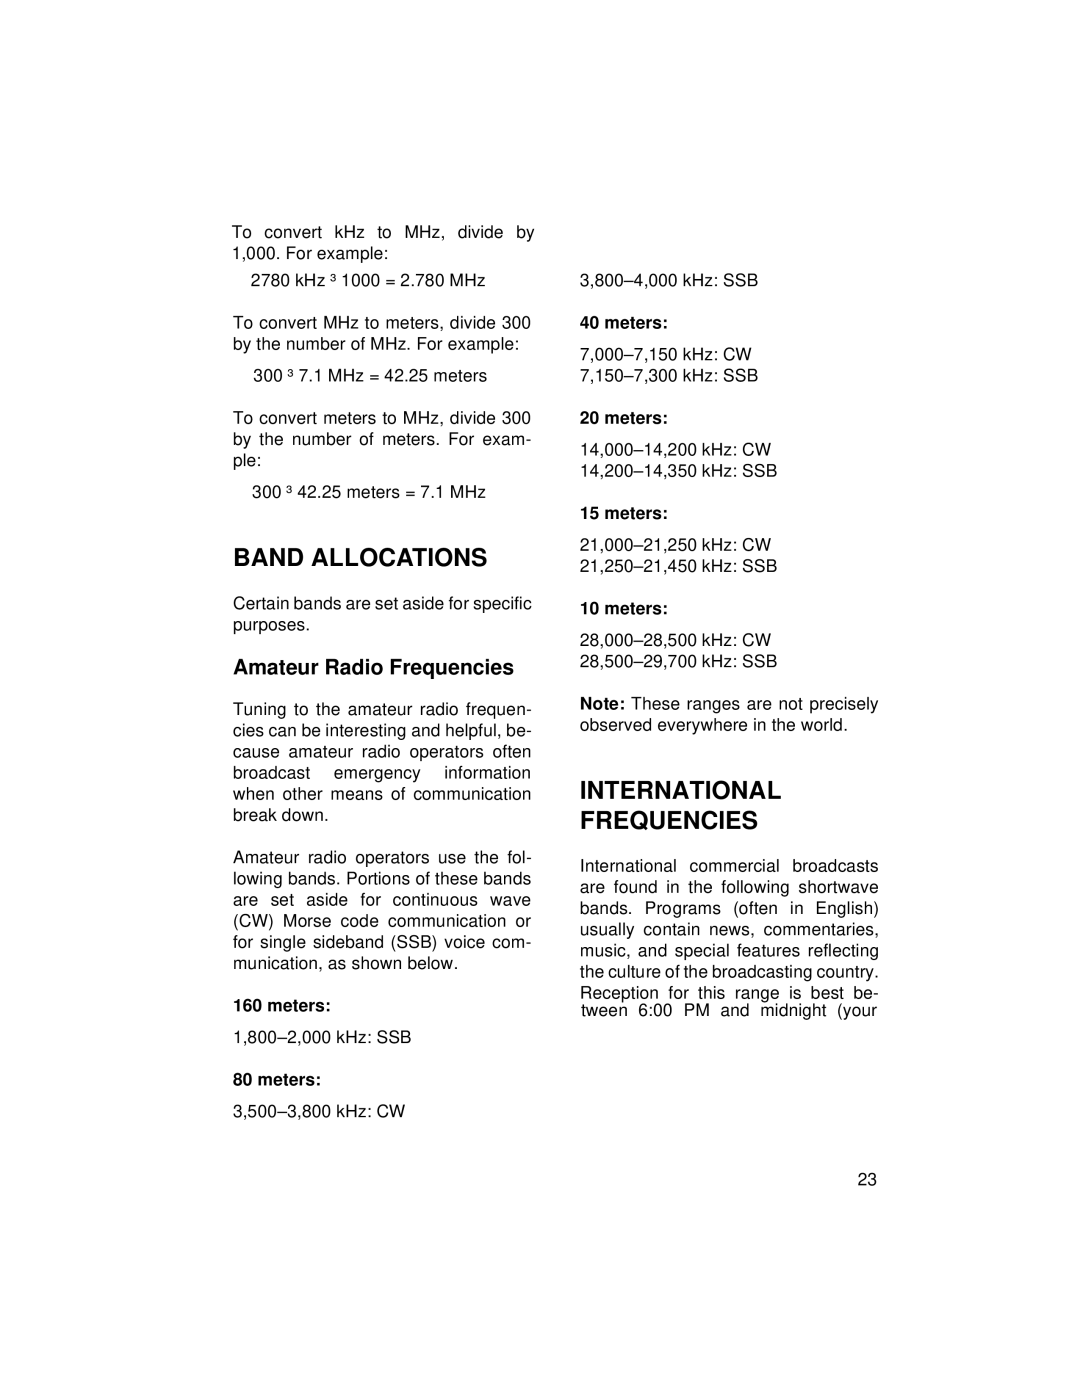 Radio Shack DX-392 owner manual Band Allocations, International Frequencies, Amateur Radio Frequencies, Meters 